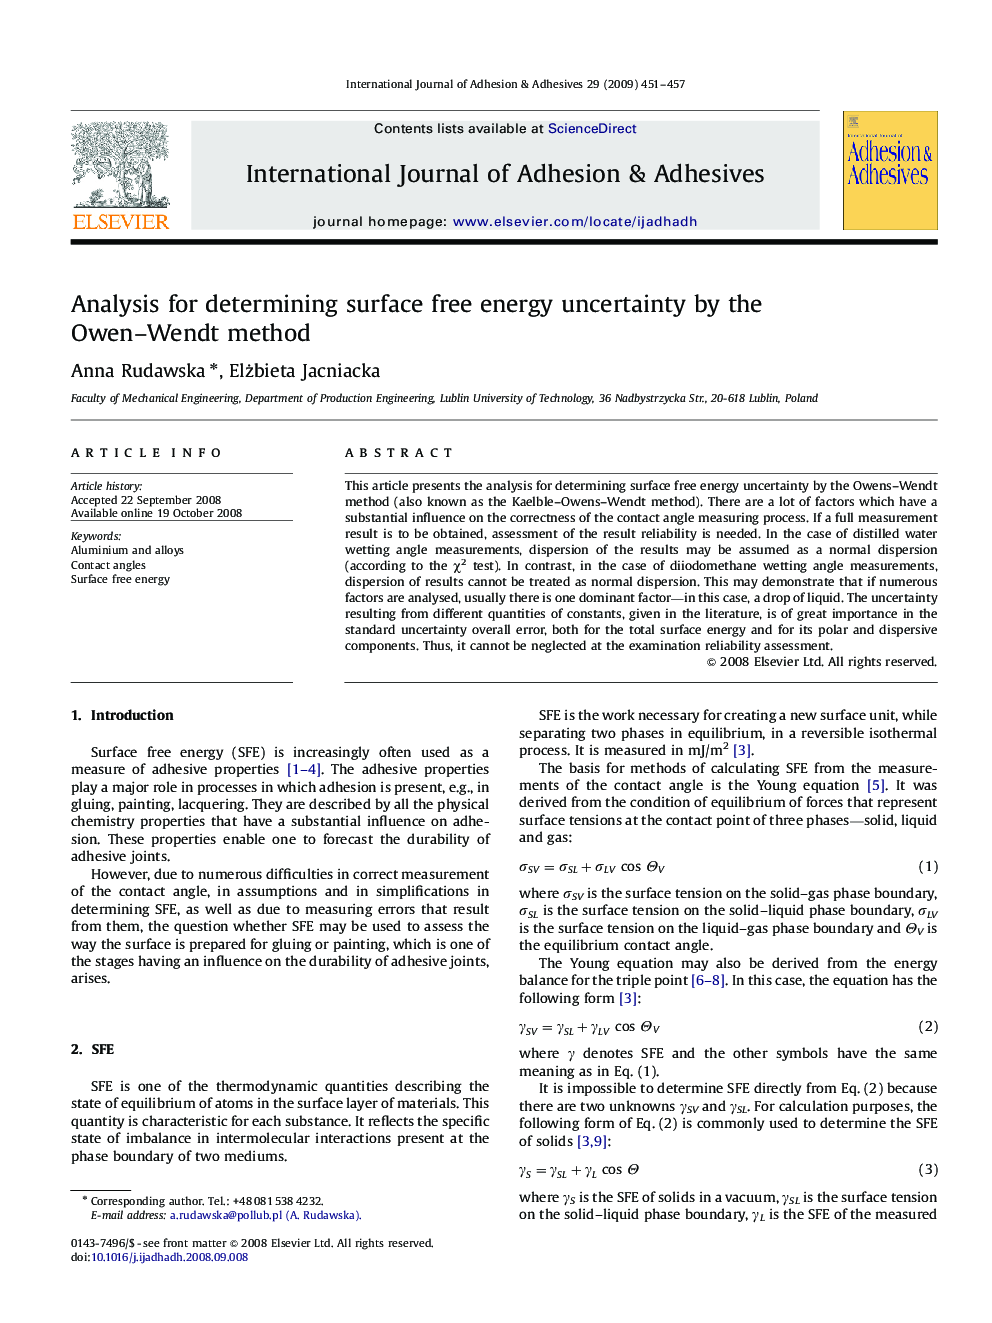 Analysis for determining surface free energy uncertainty by the Owen–Wendt method